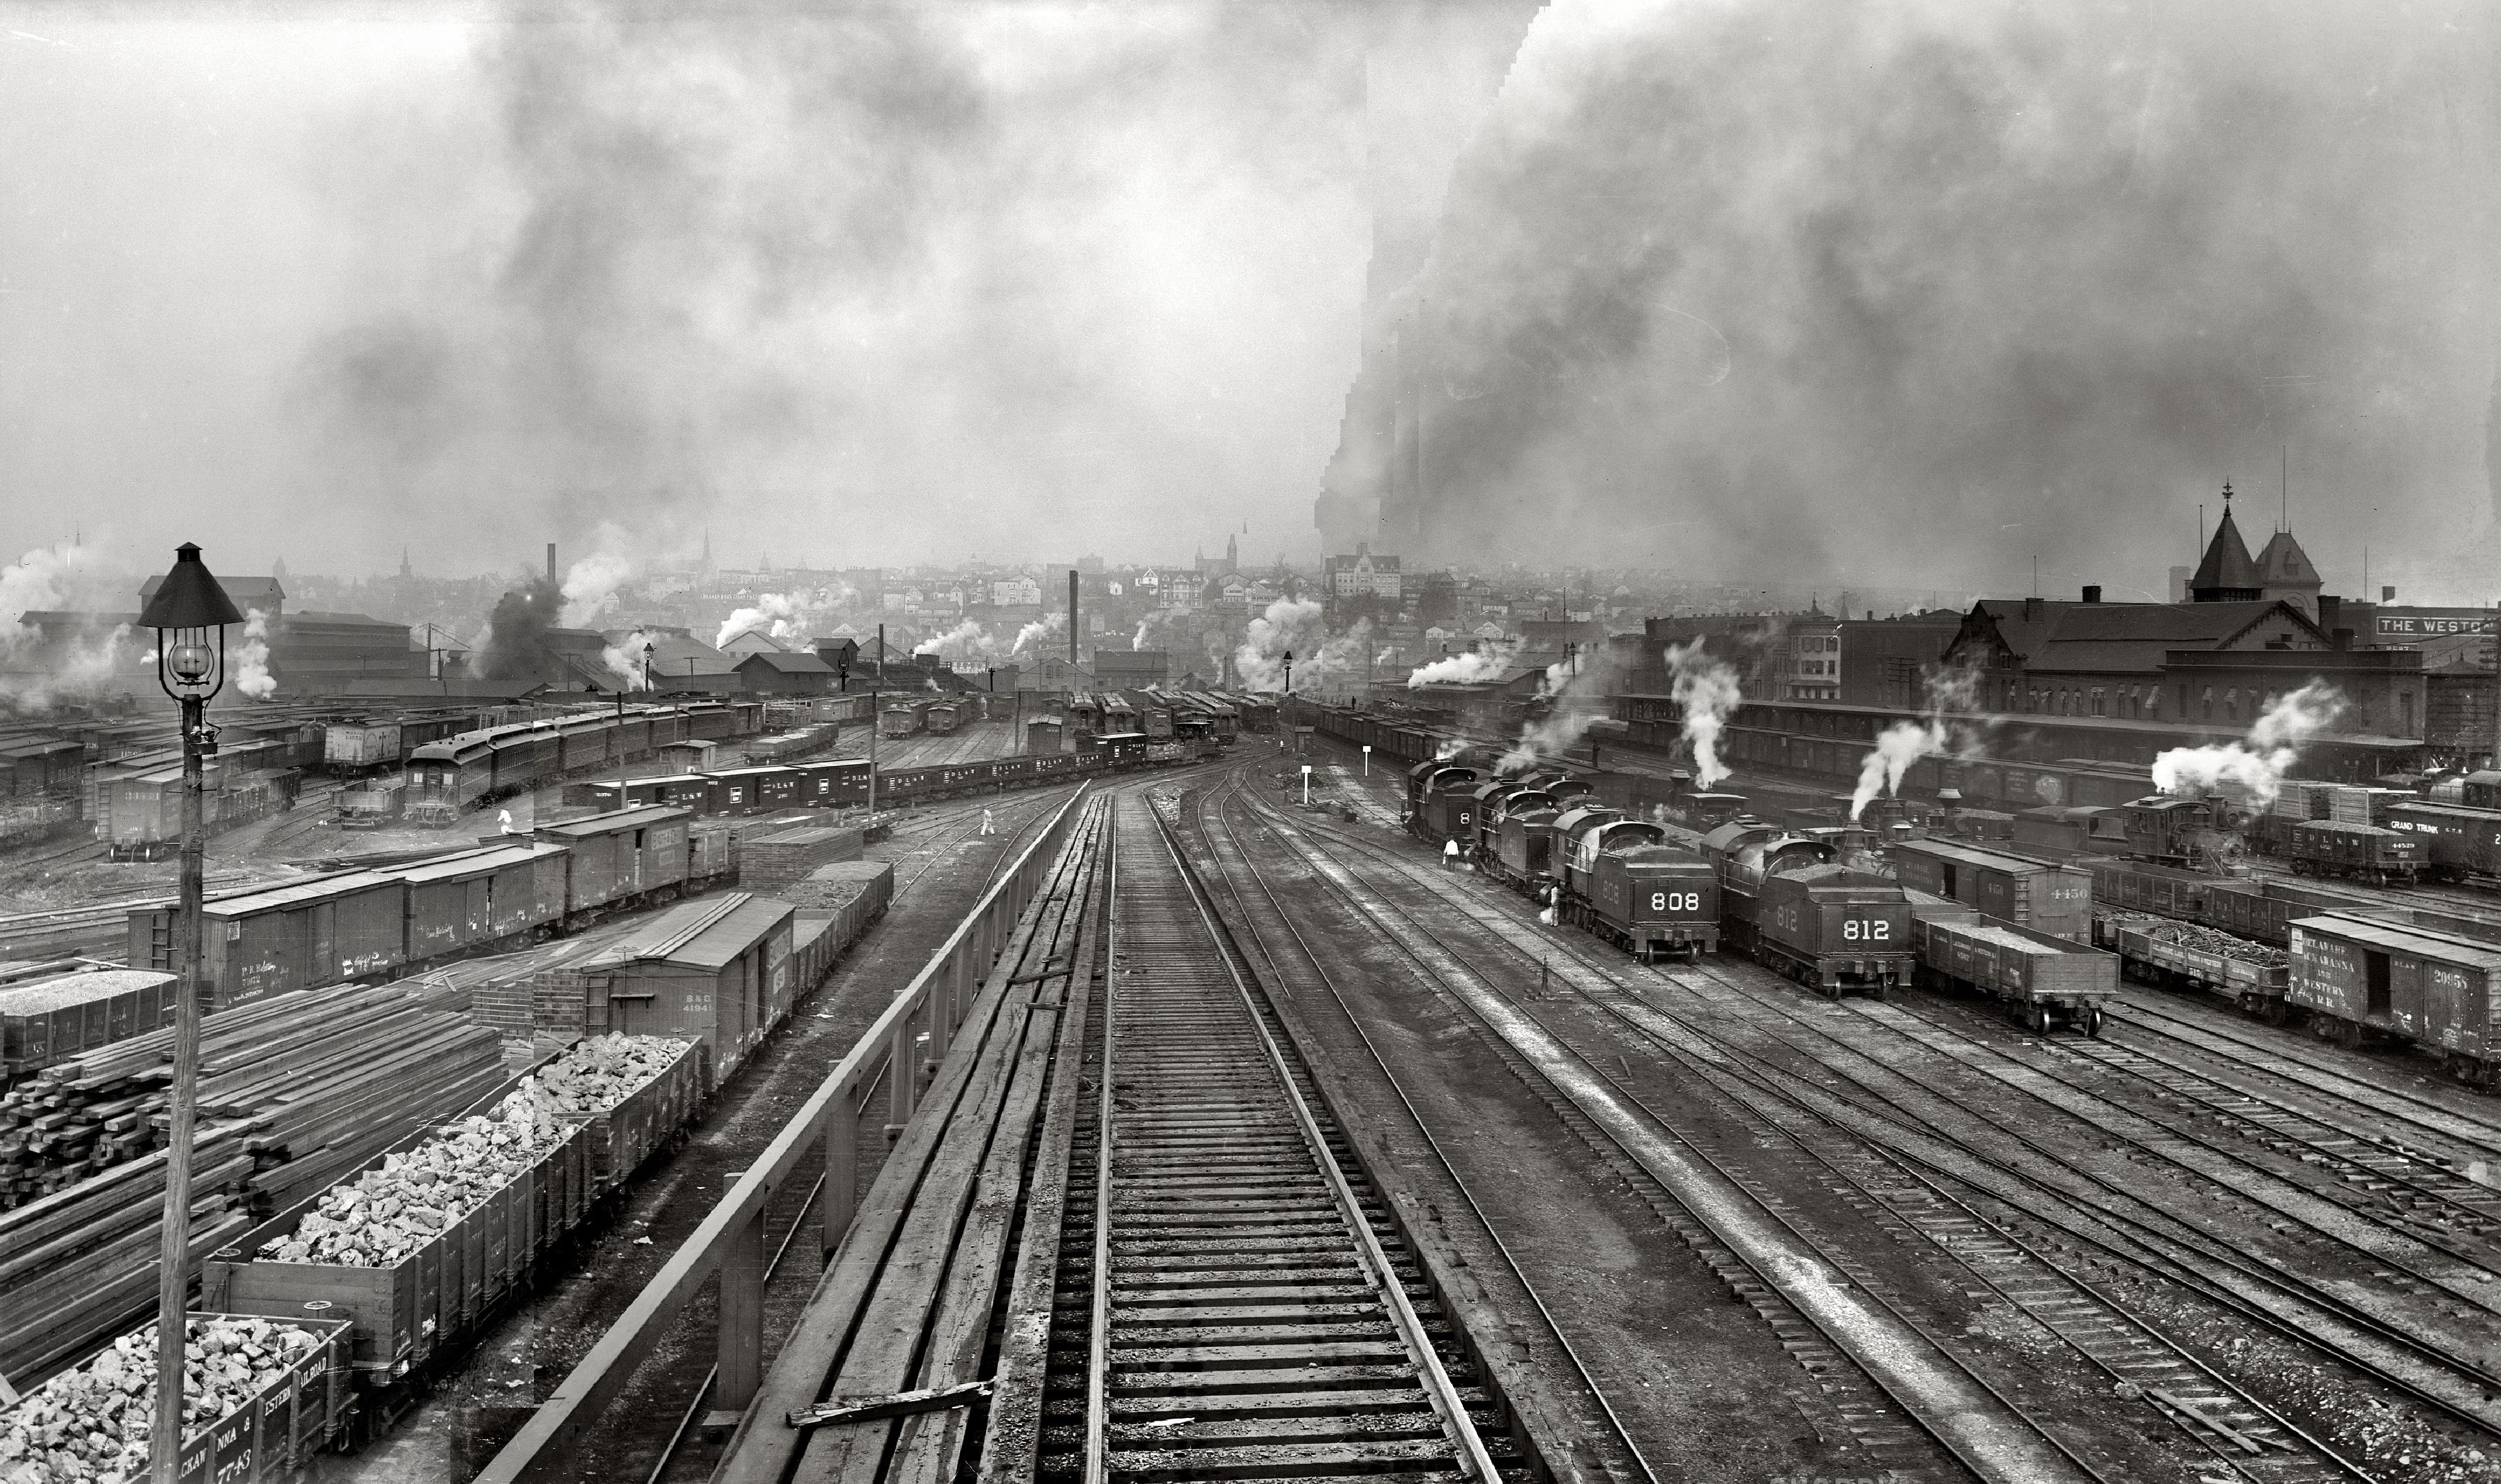 Scranton, Pennsylvania, circa 1900. "Delaware, Lackawanna, and Western Railroad yards," the two images Scranton: 1900 and Old King Coal: 1900 put together, using some cut & paste techniques. The difference is only one freight train, the smart observer Dave recognized the man in the white overalls, who seems now to have solved the "bilocation" problem! View full size.